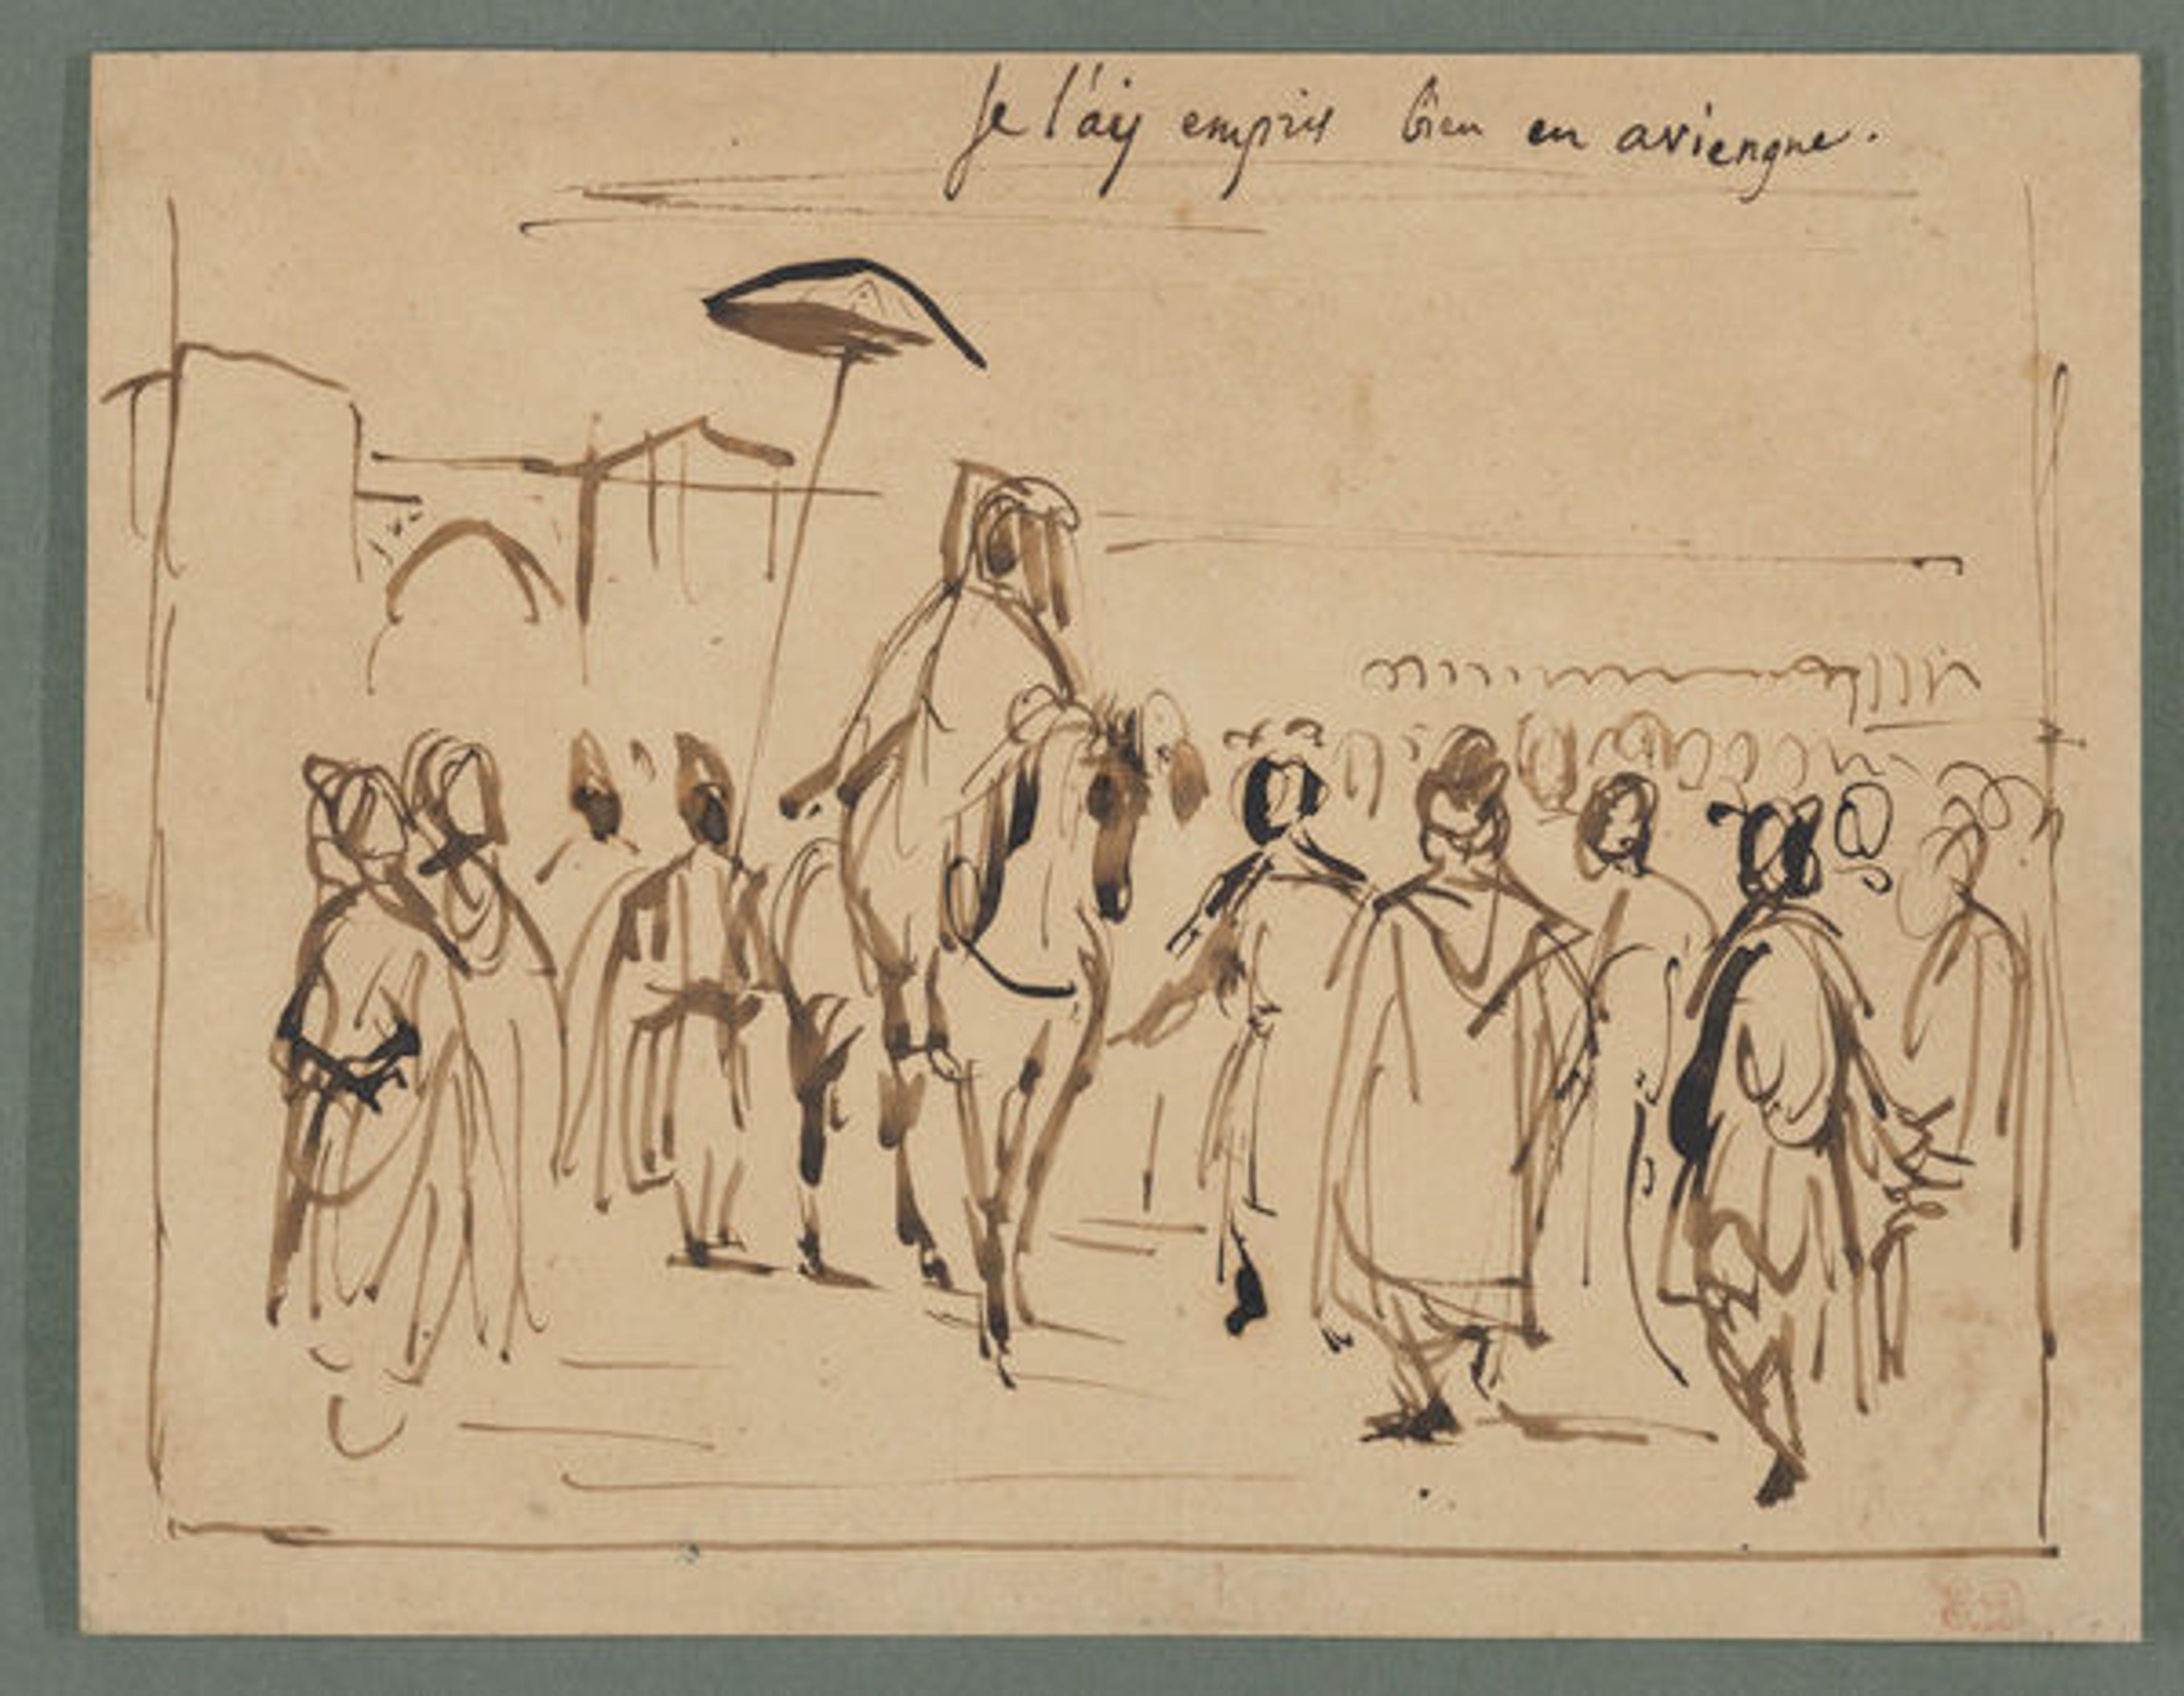 Eugène Delacroix (French, 1798–1863) | Study for The Sultan of Morocco and His Entourage, ca. 1832–33 | The Metropolitan Museum of Art, New York, Gift from the Karen B. Cohen Collection of Eugène Delacroix, in honor of Henri Loyrette, 2013 (2013.1135.20)